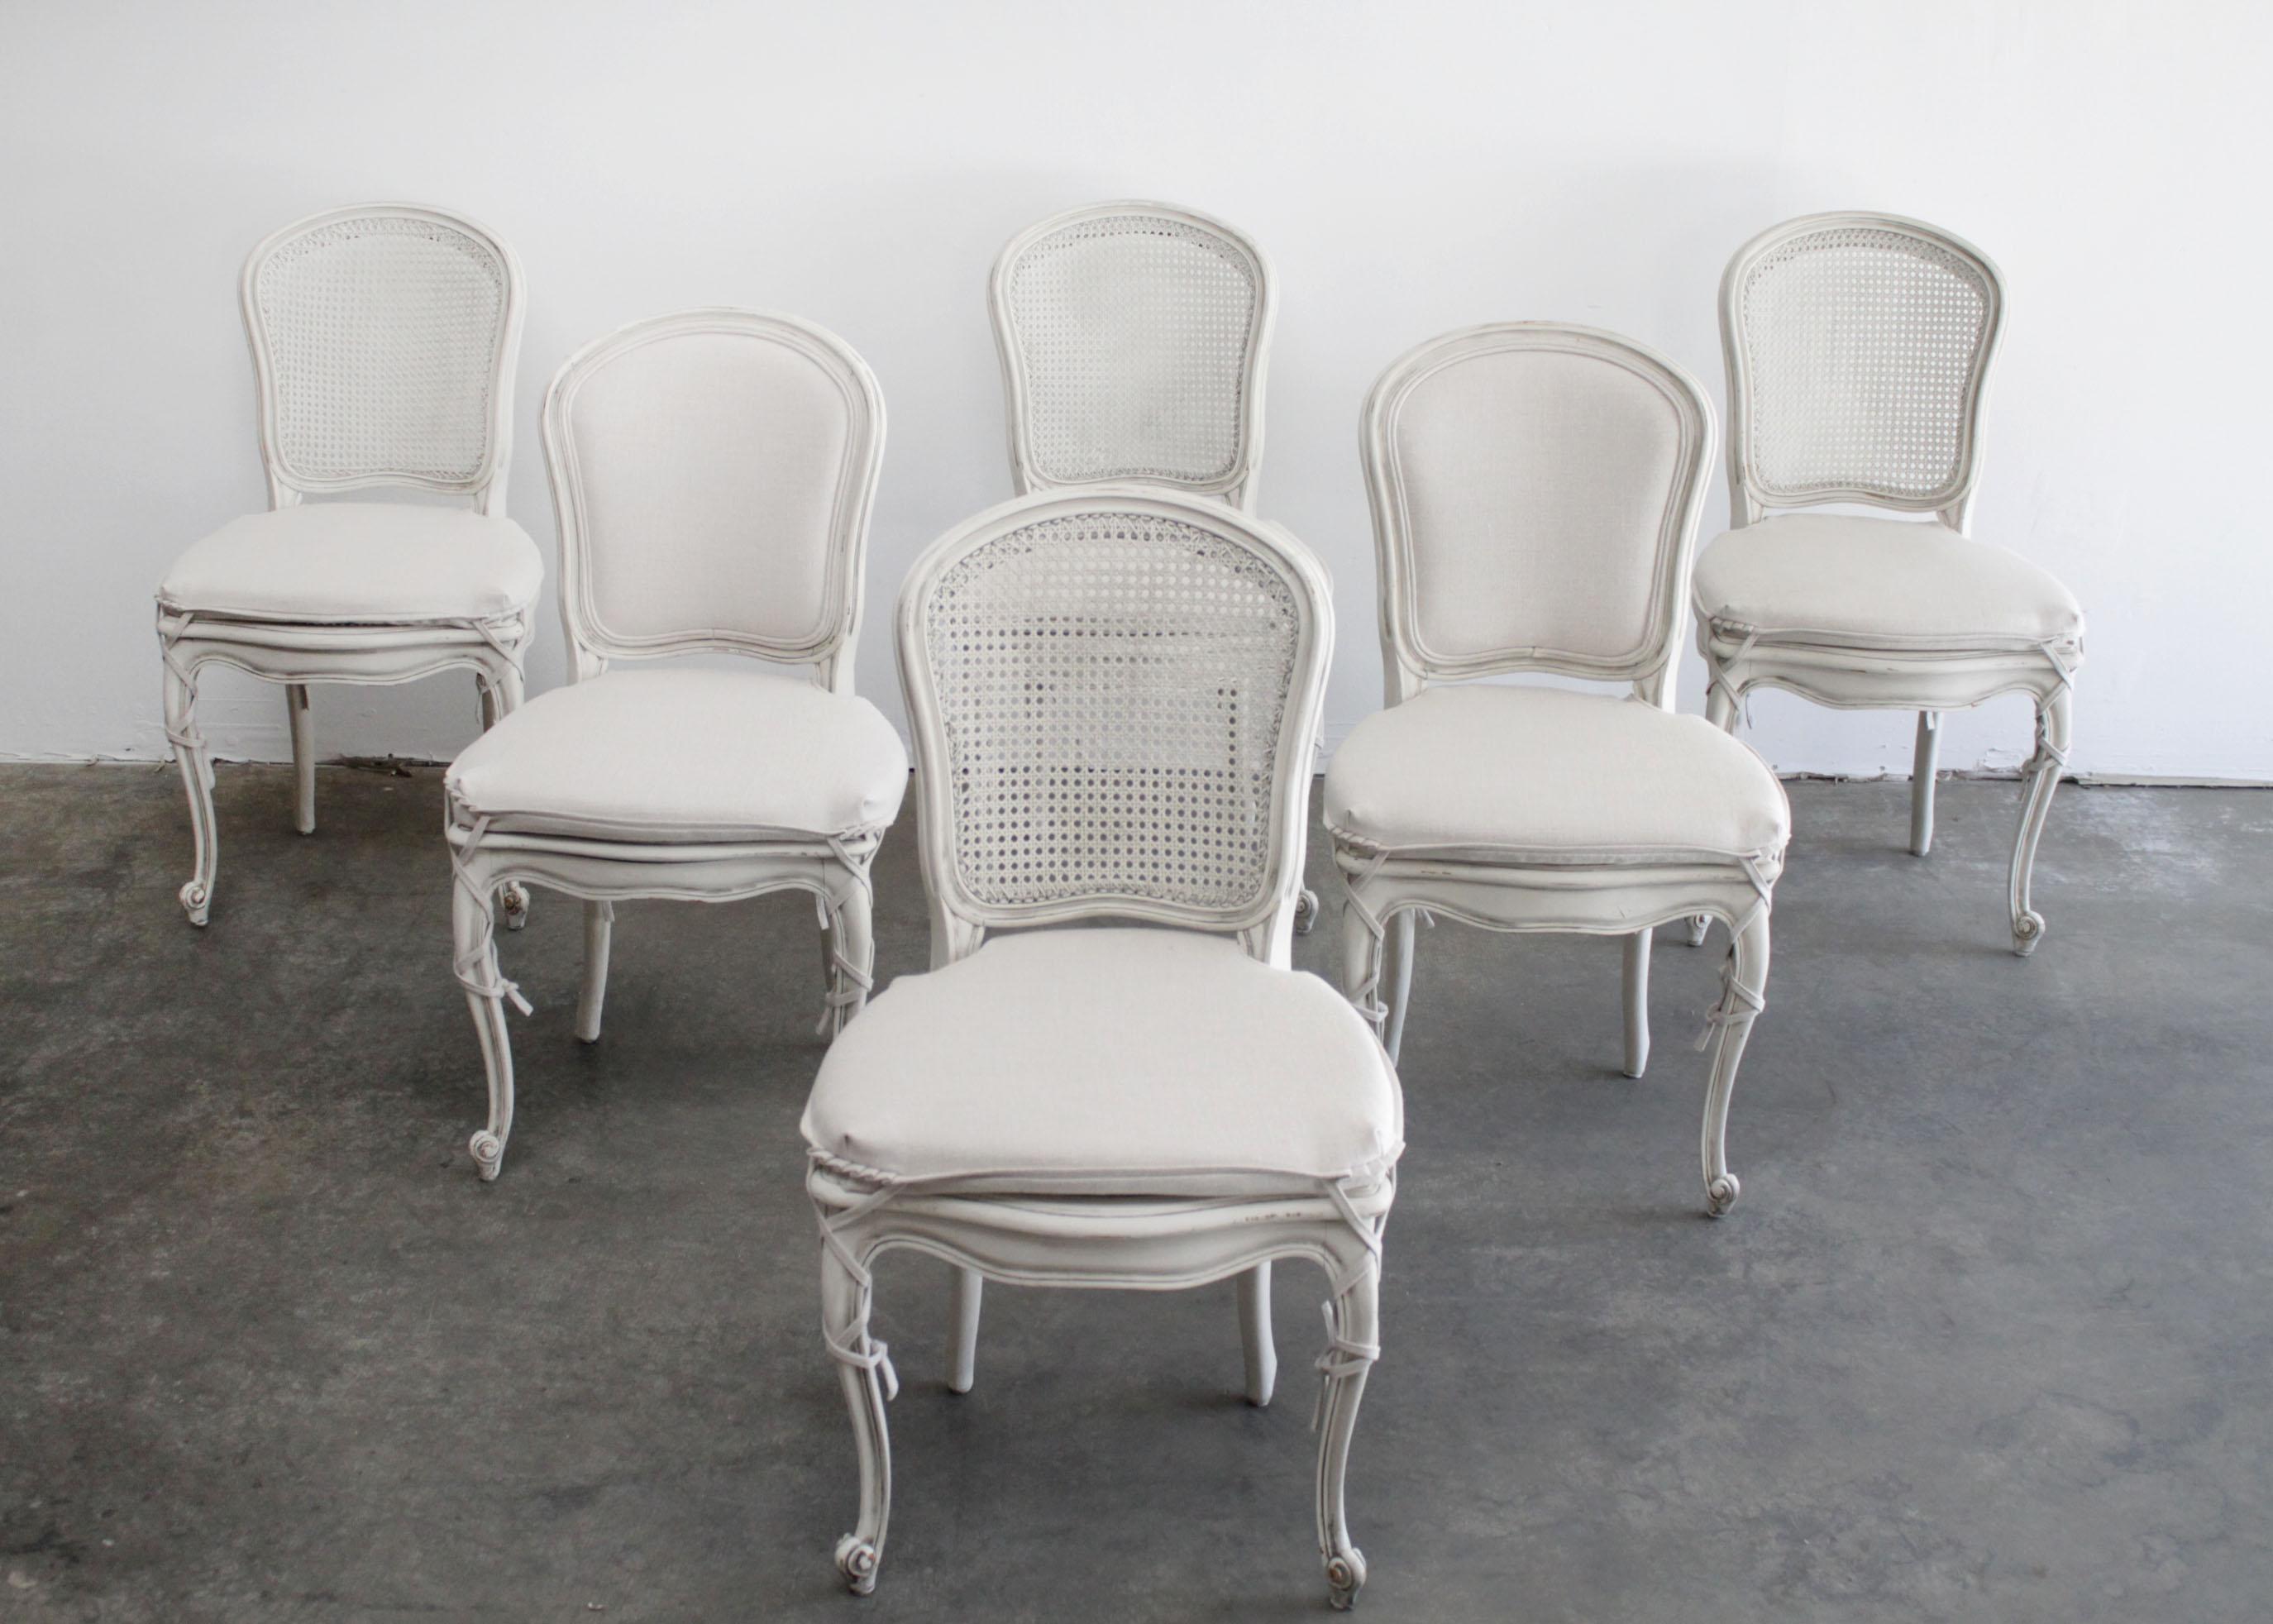 Set of 6 painted and upholstered cane back dining chairs with slip covers
Painted in our antique white finish, with subtle distressed edges, and antique
glazed patina.
This set includes 6 side chairs, 2 of them have upholstered backs, and the